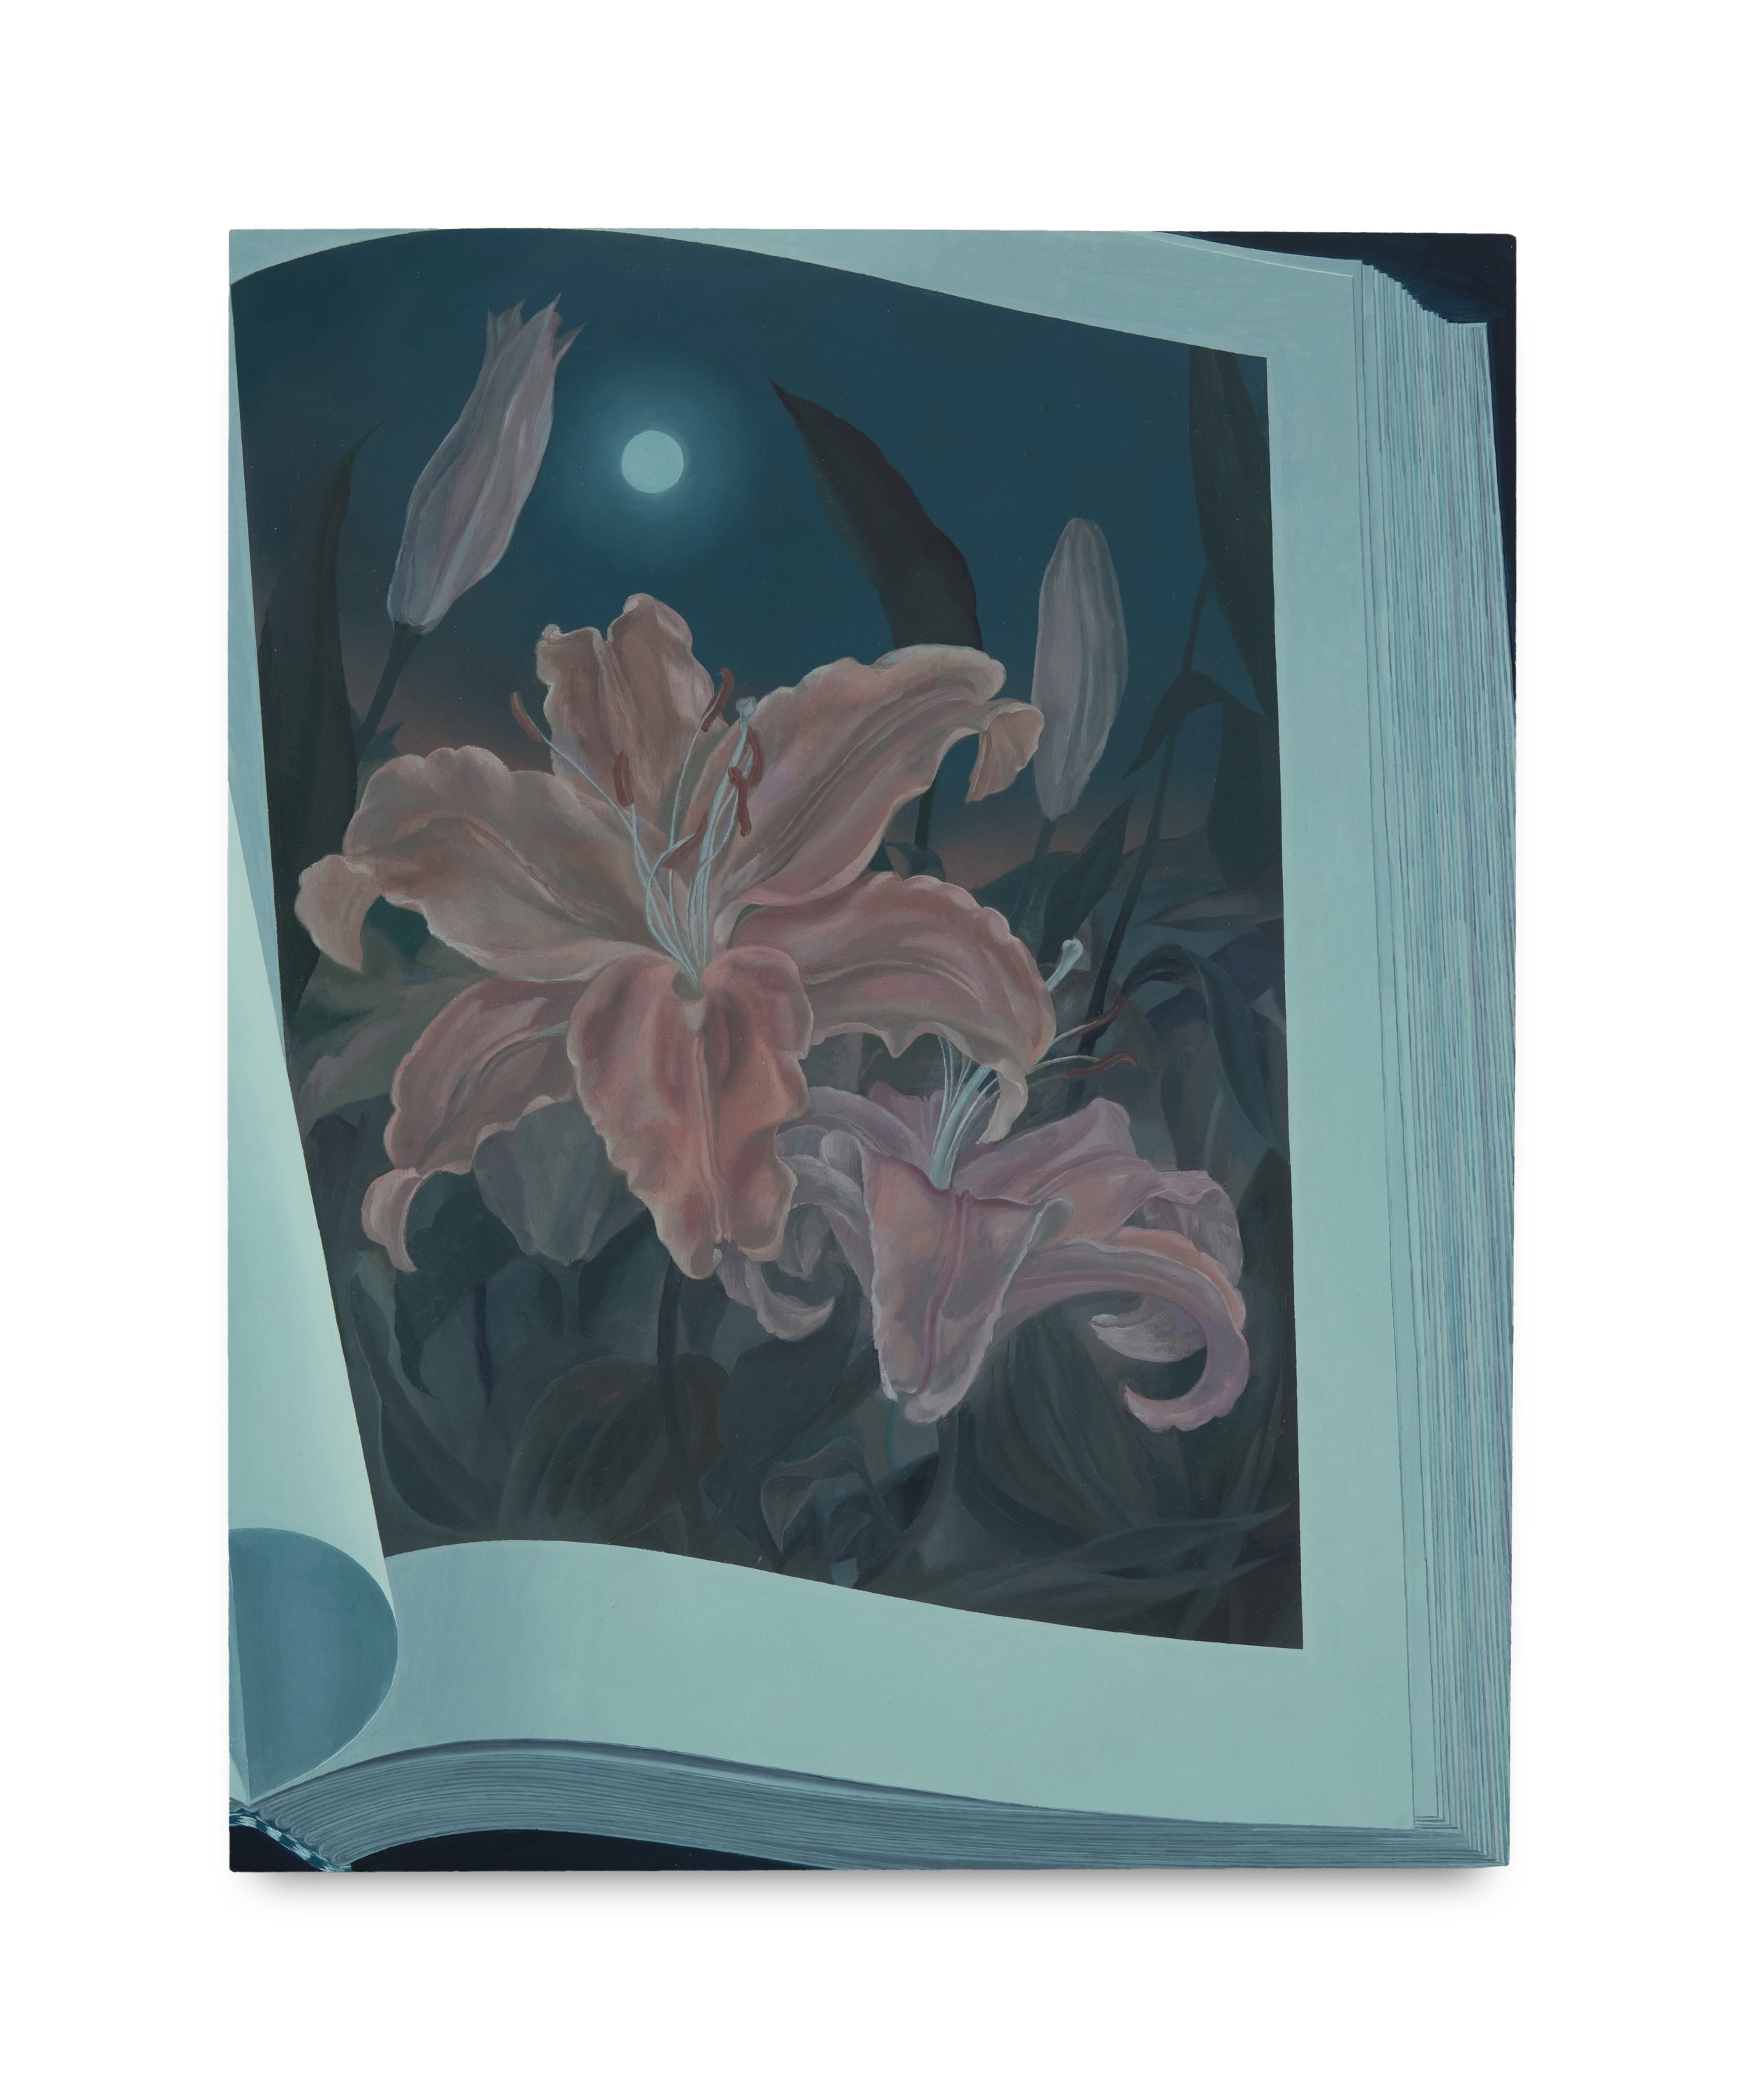   Untitled (moonlight lilies)  Oil on panel 14 x 11 inches 2022  Photograph by Tom Carter, courtesy of Workplace Gallery, London, U.K. 